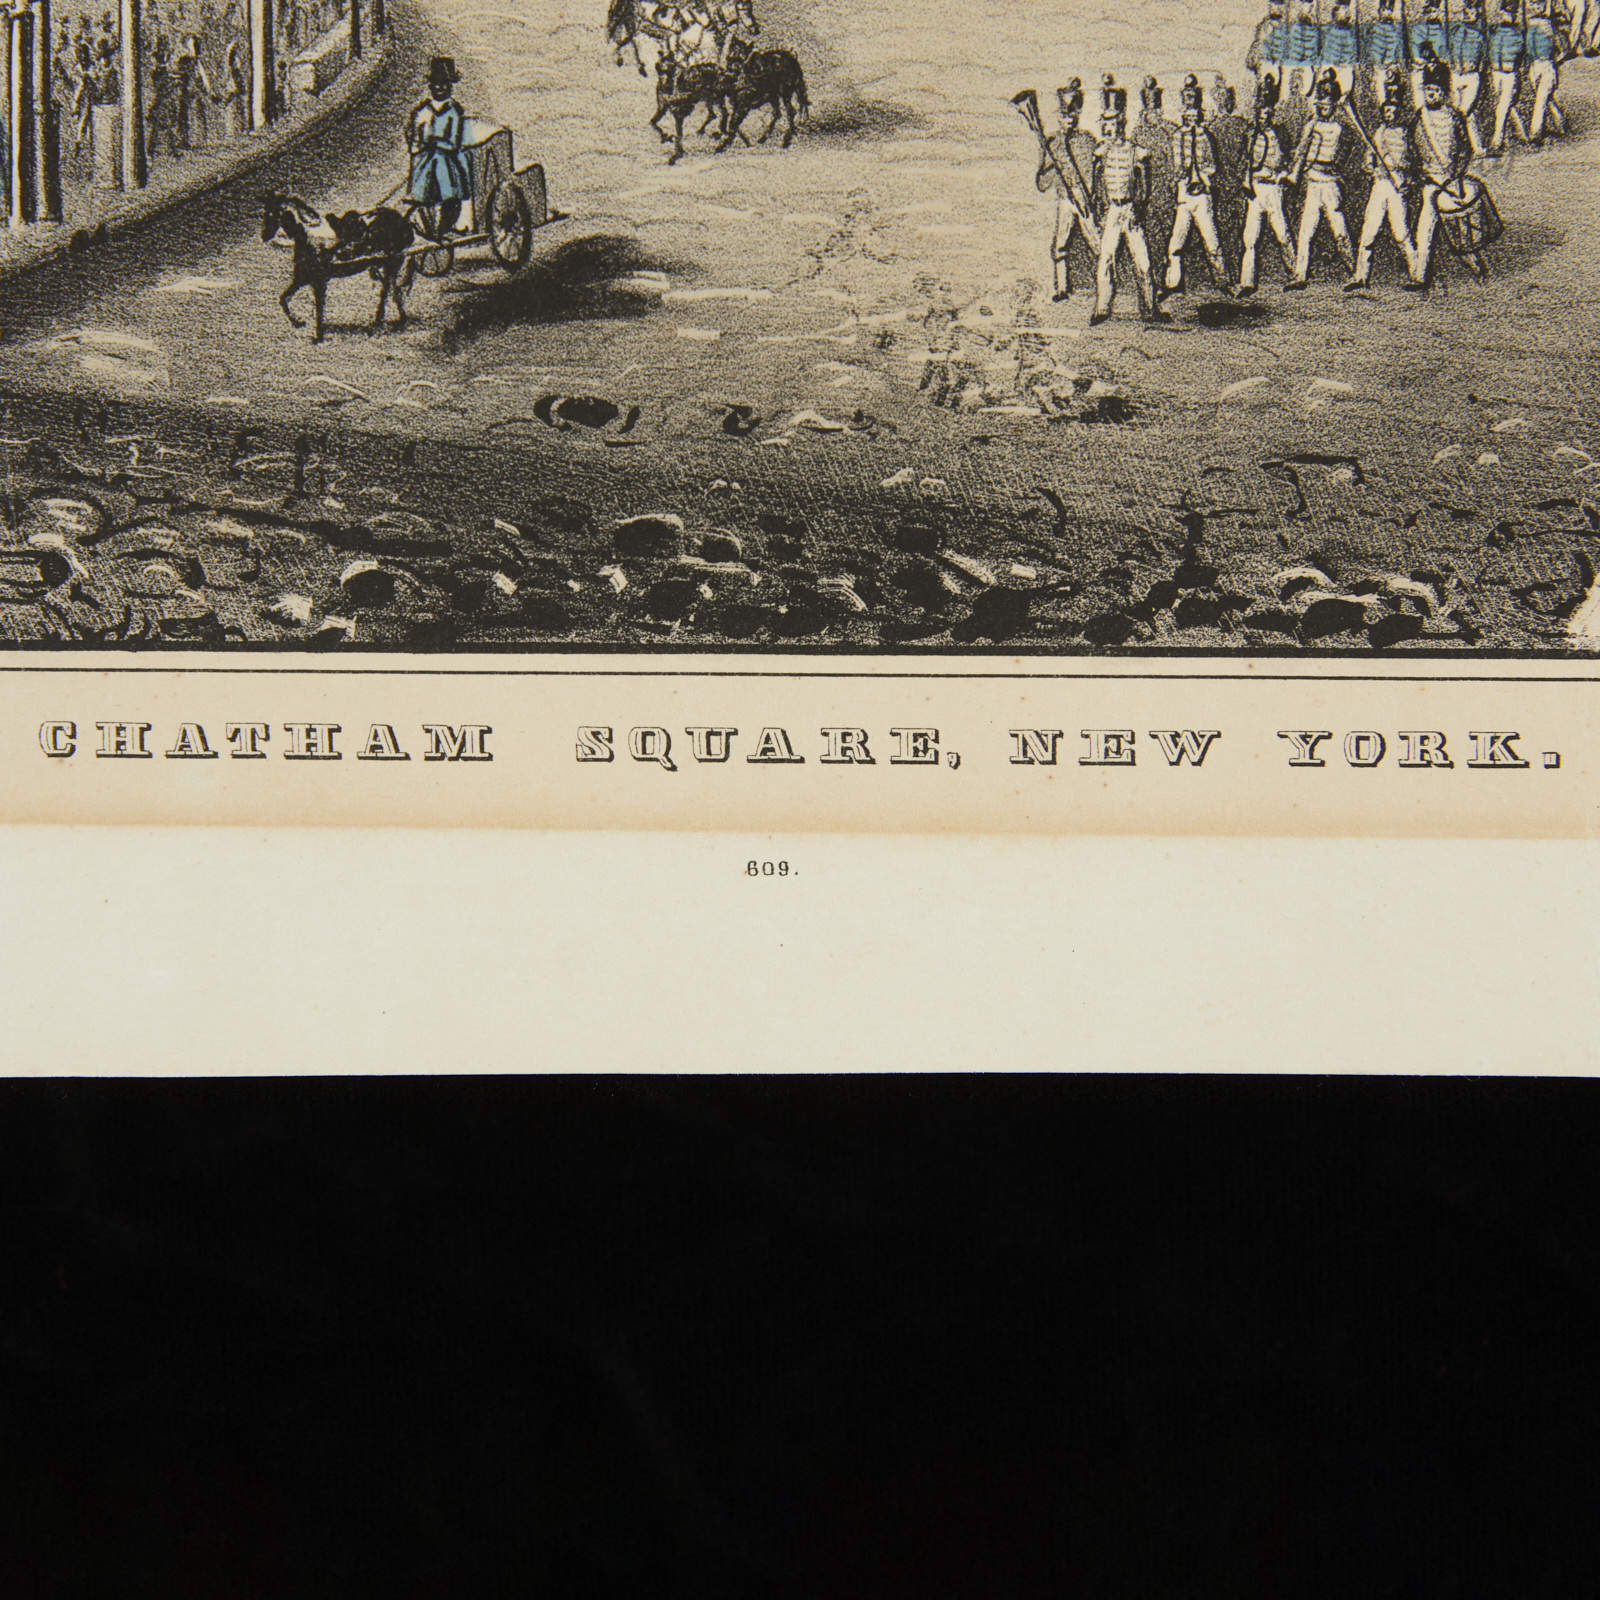 Currier & Ives "Chatham Square, New York" Print - Image 2 of 7